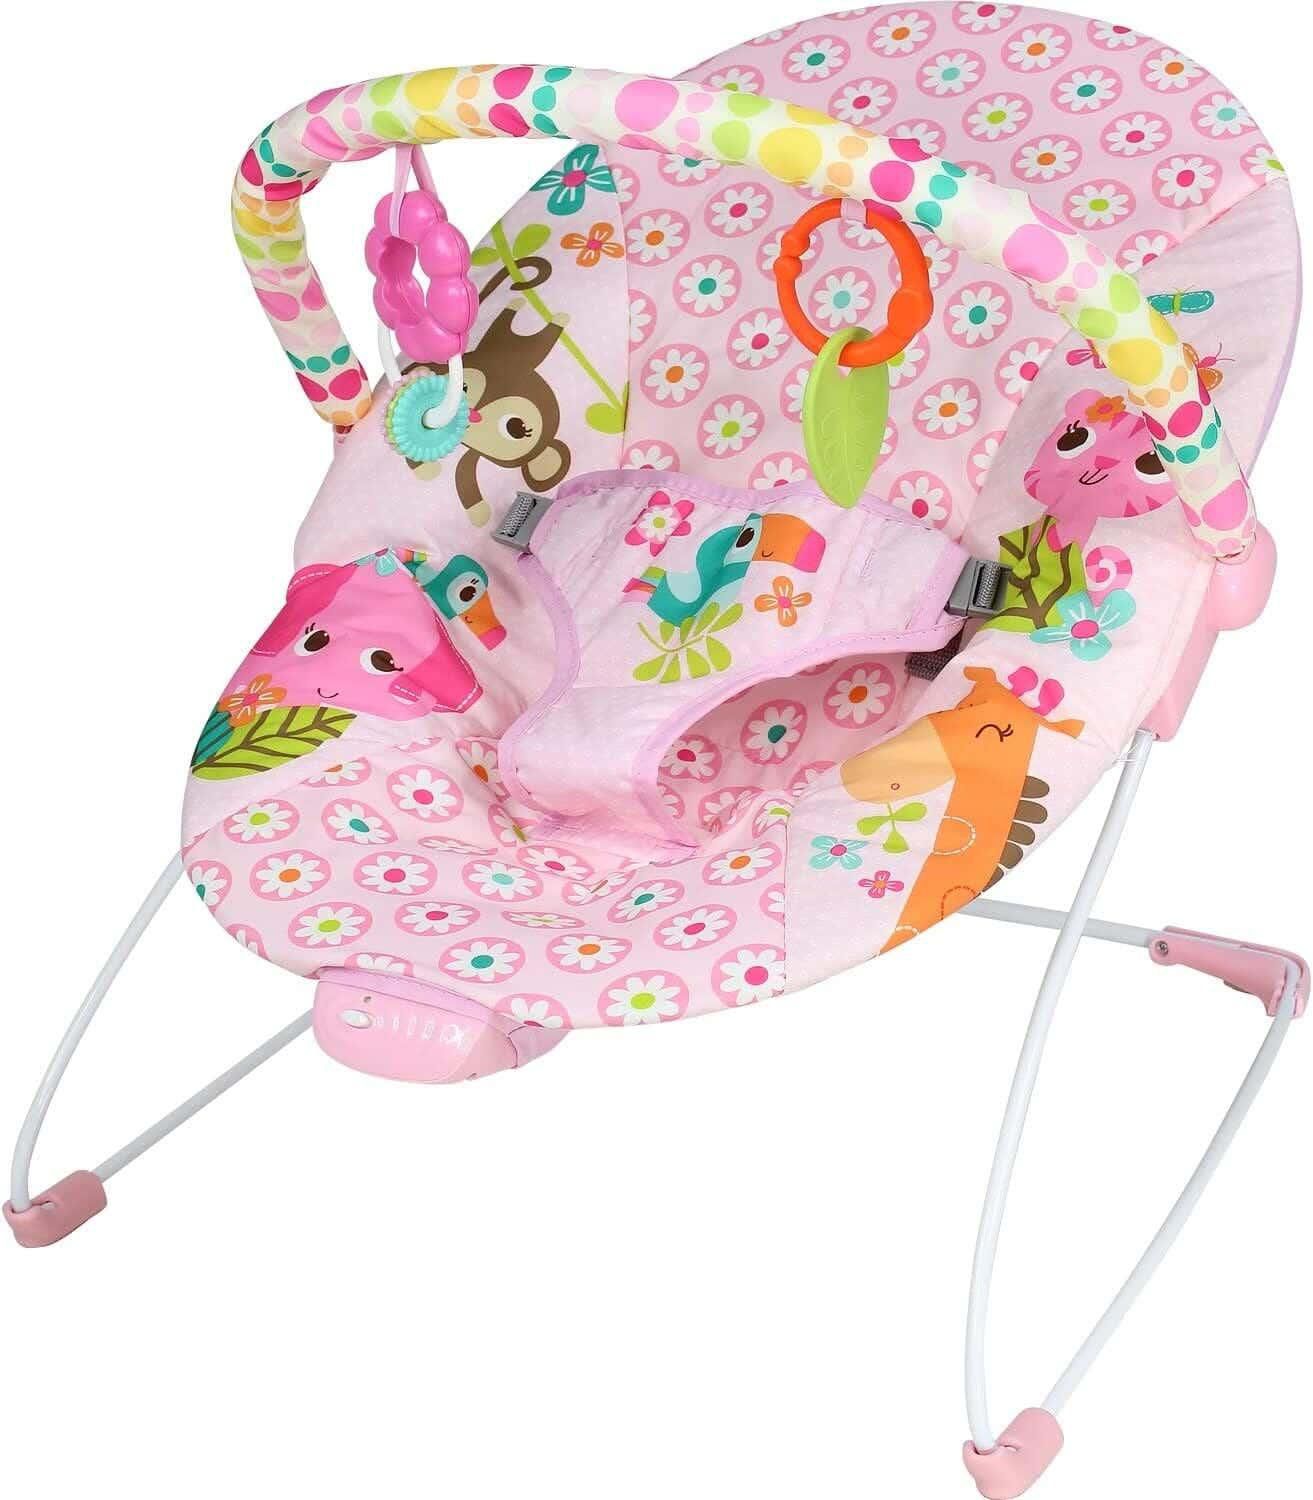 Get Children'S Rocking Chair, Non-Slip, Load Capacity Up To 15 Kg - Multicolor with best offers | Raneen.com